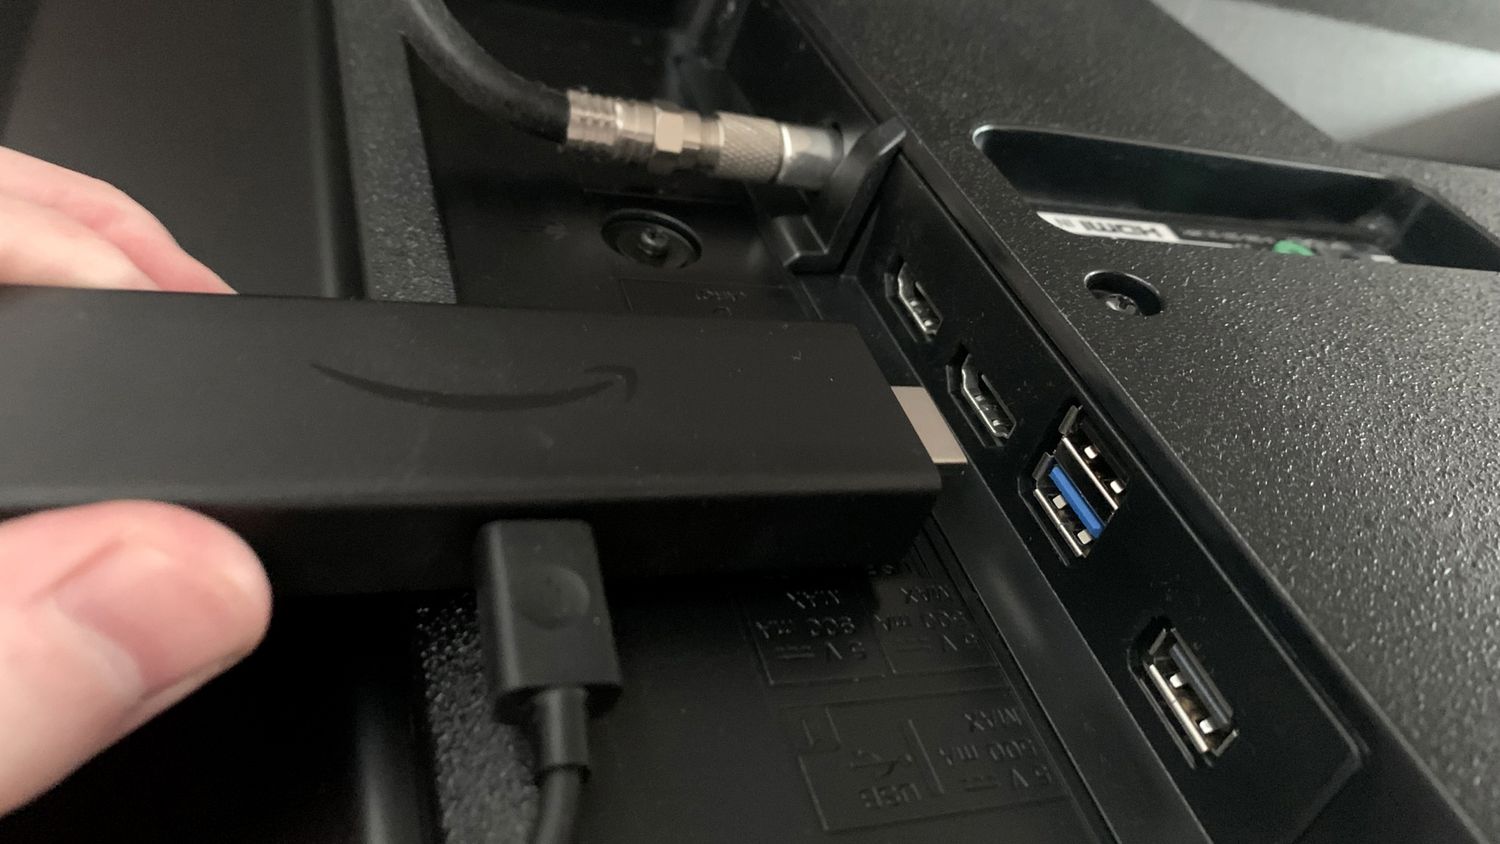 USB Streaming: Connecting Phone To TV